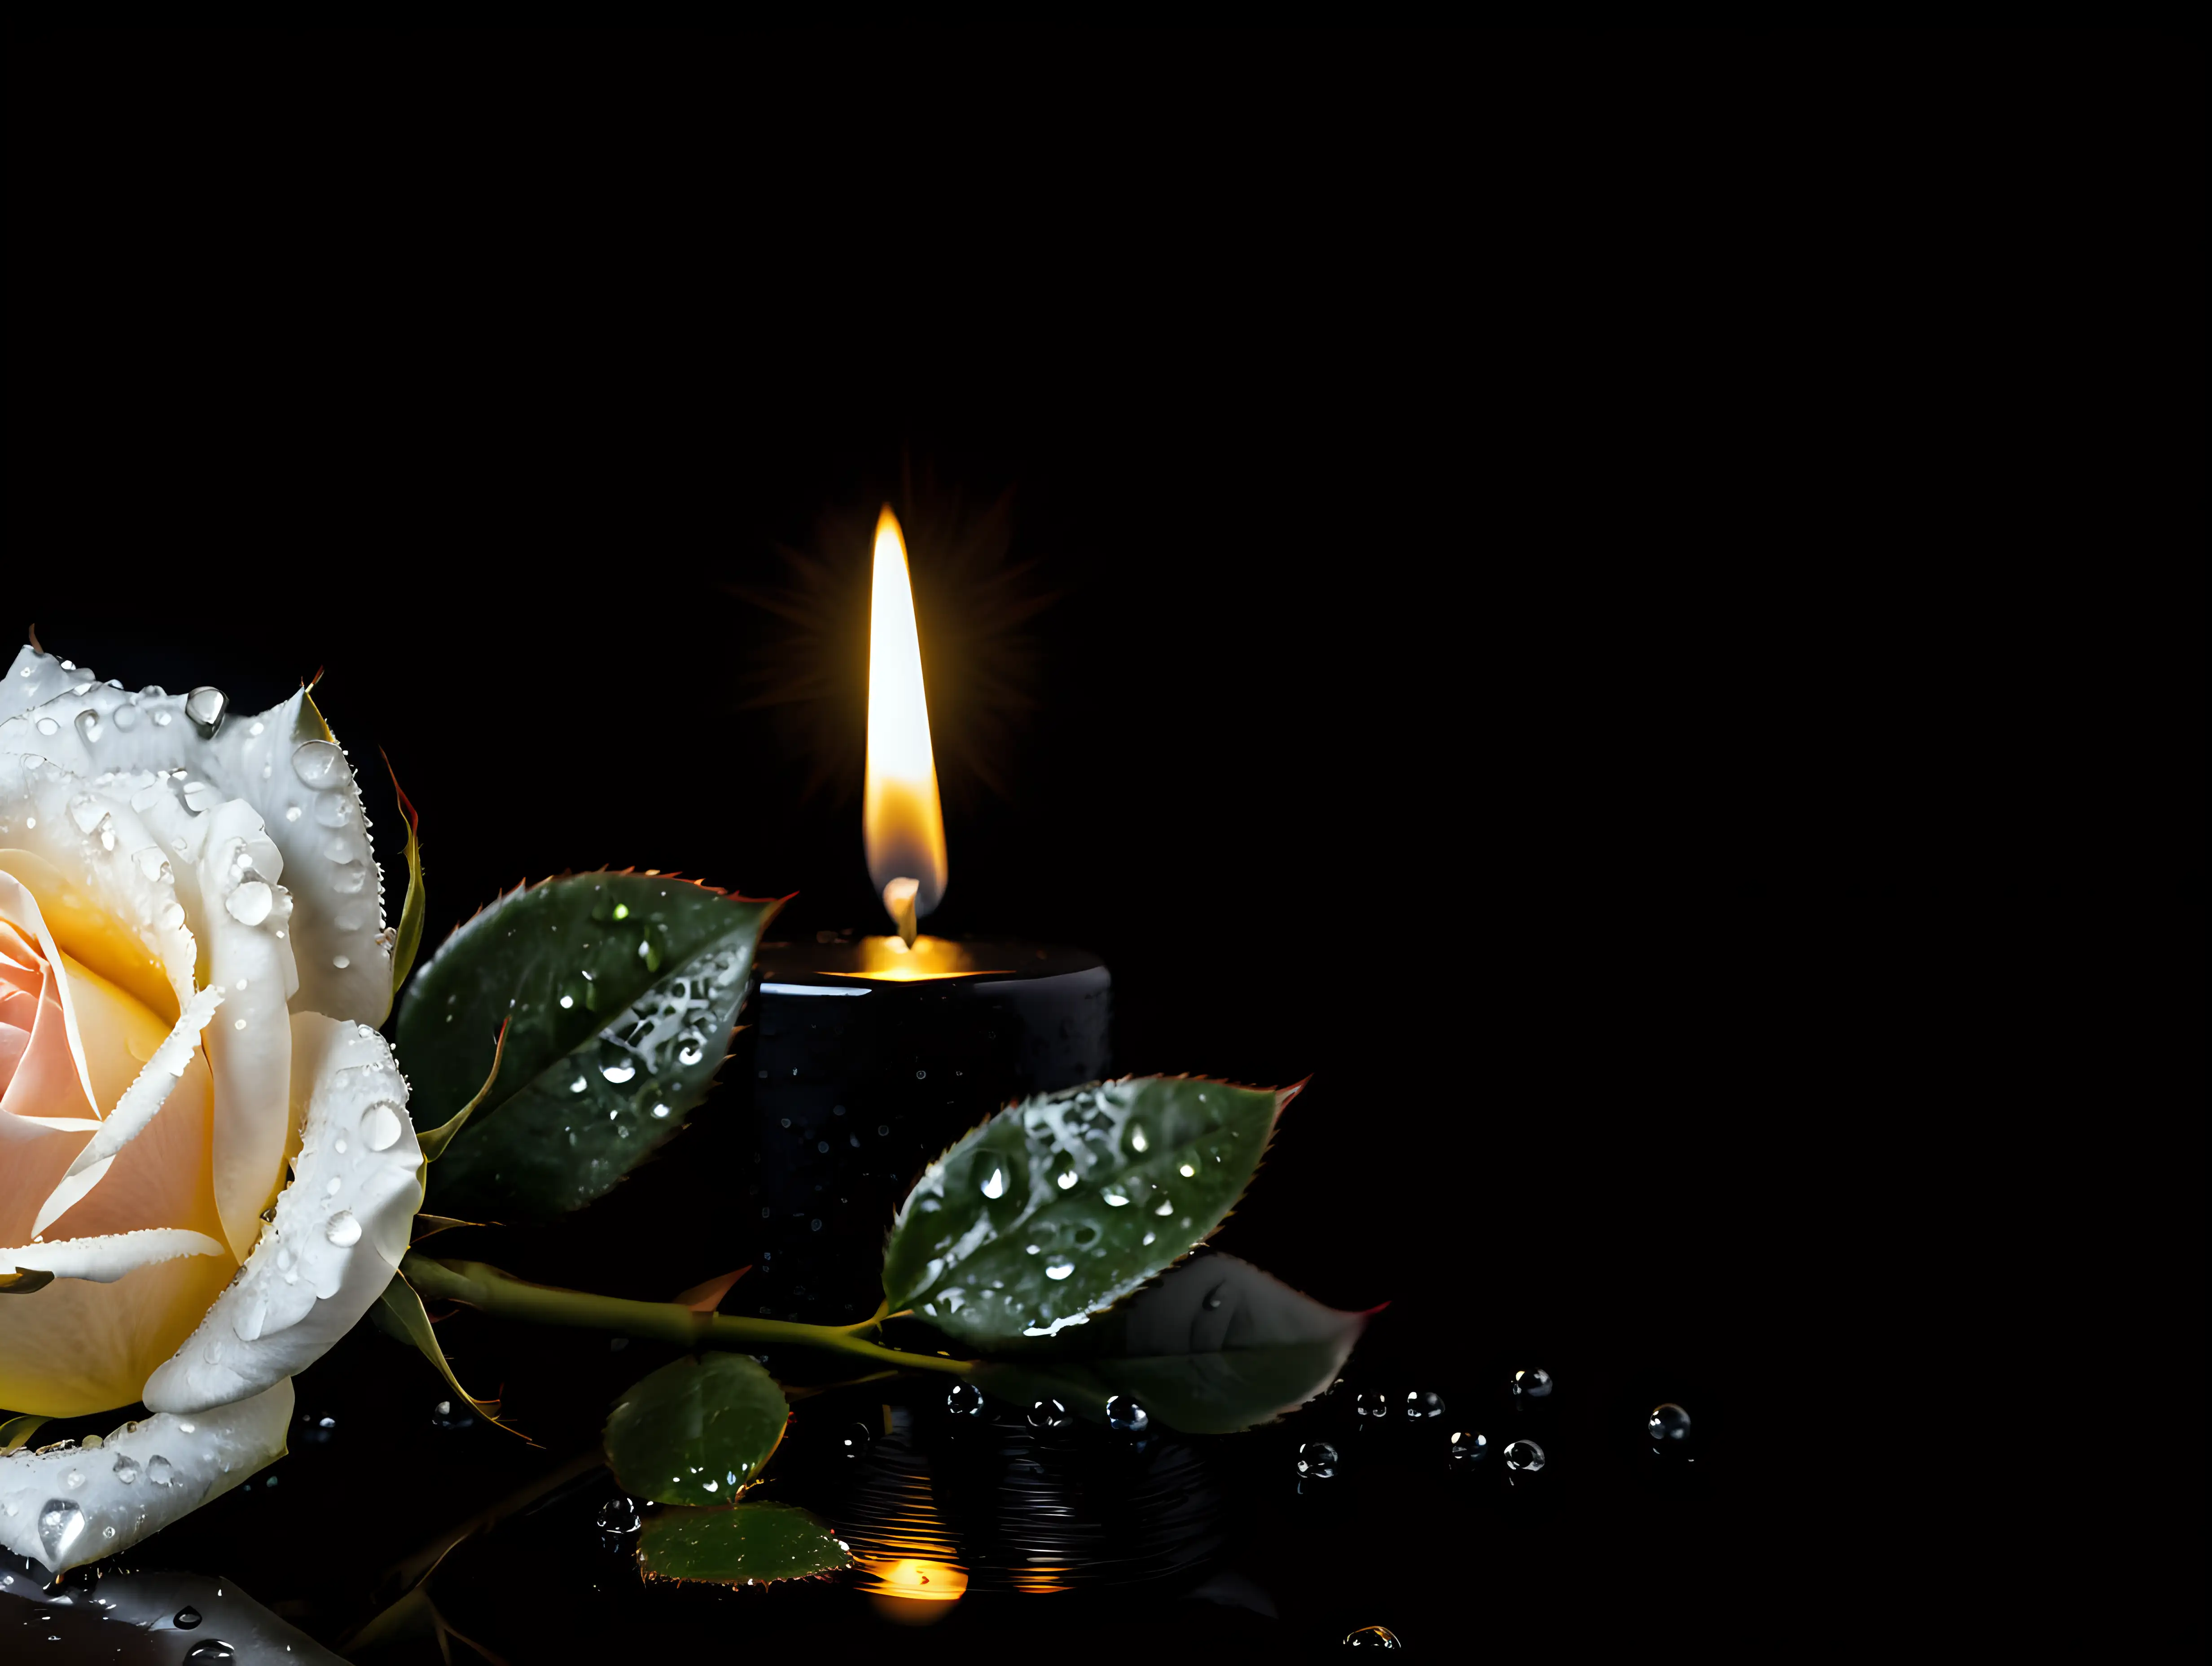 Hyperrealistic RaindropCovered Rose with Candle on Black Background